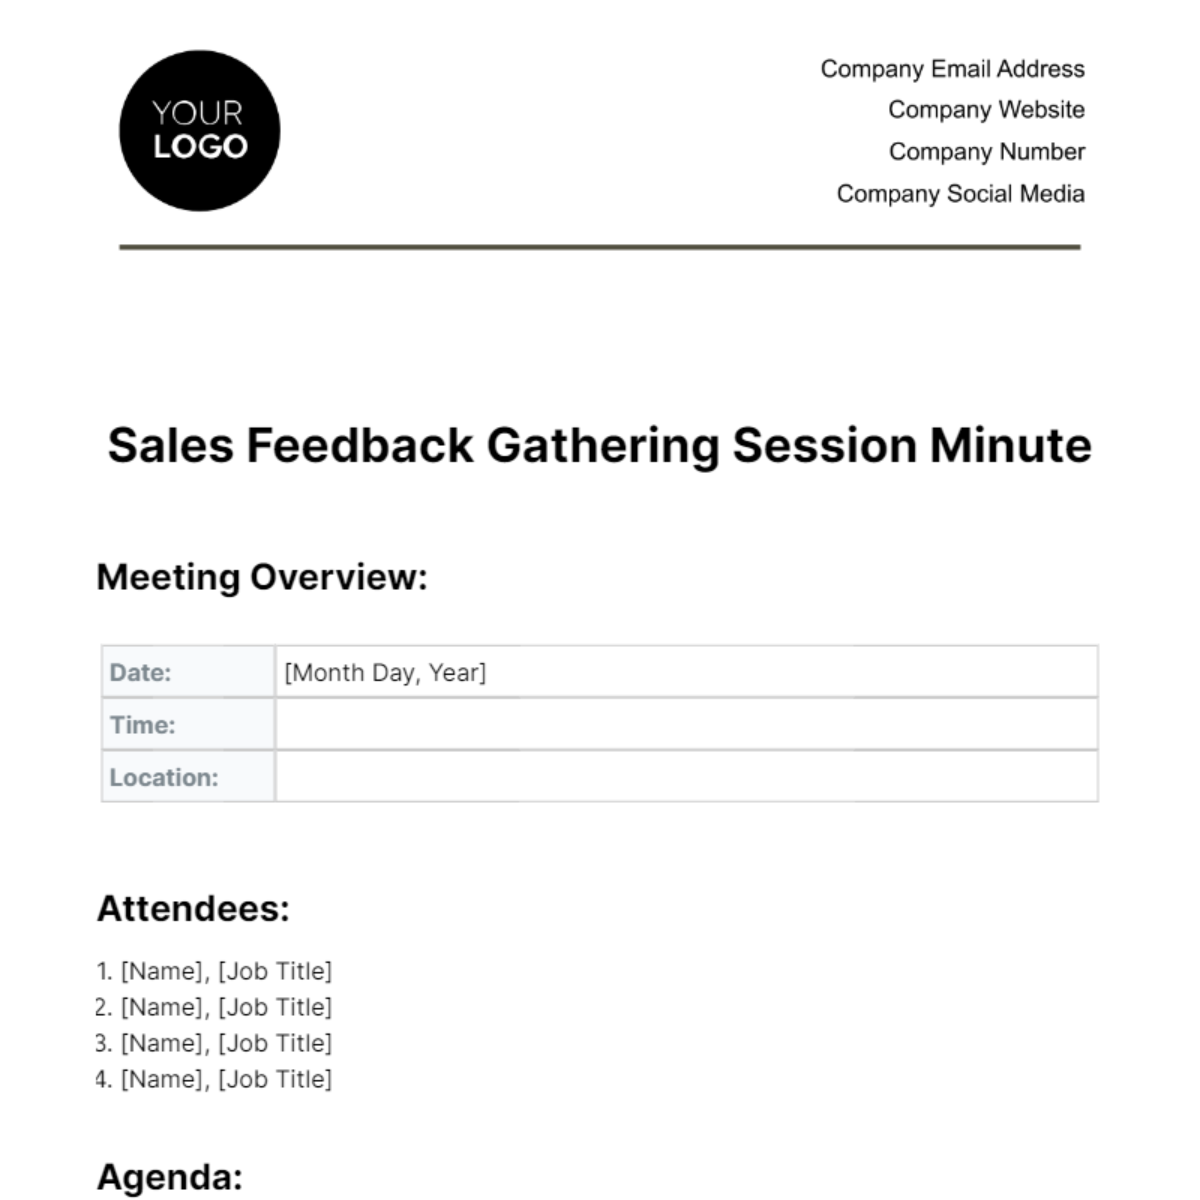 Sales Feedback Gathering Session Minute Template